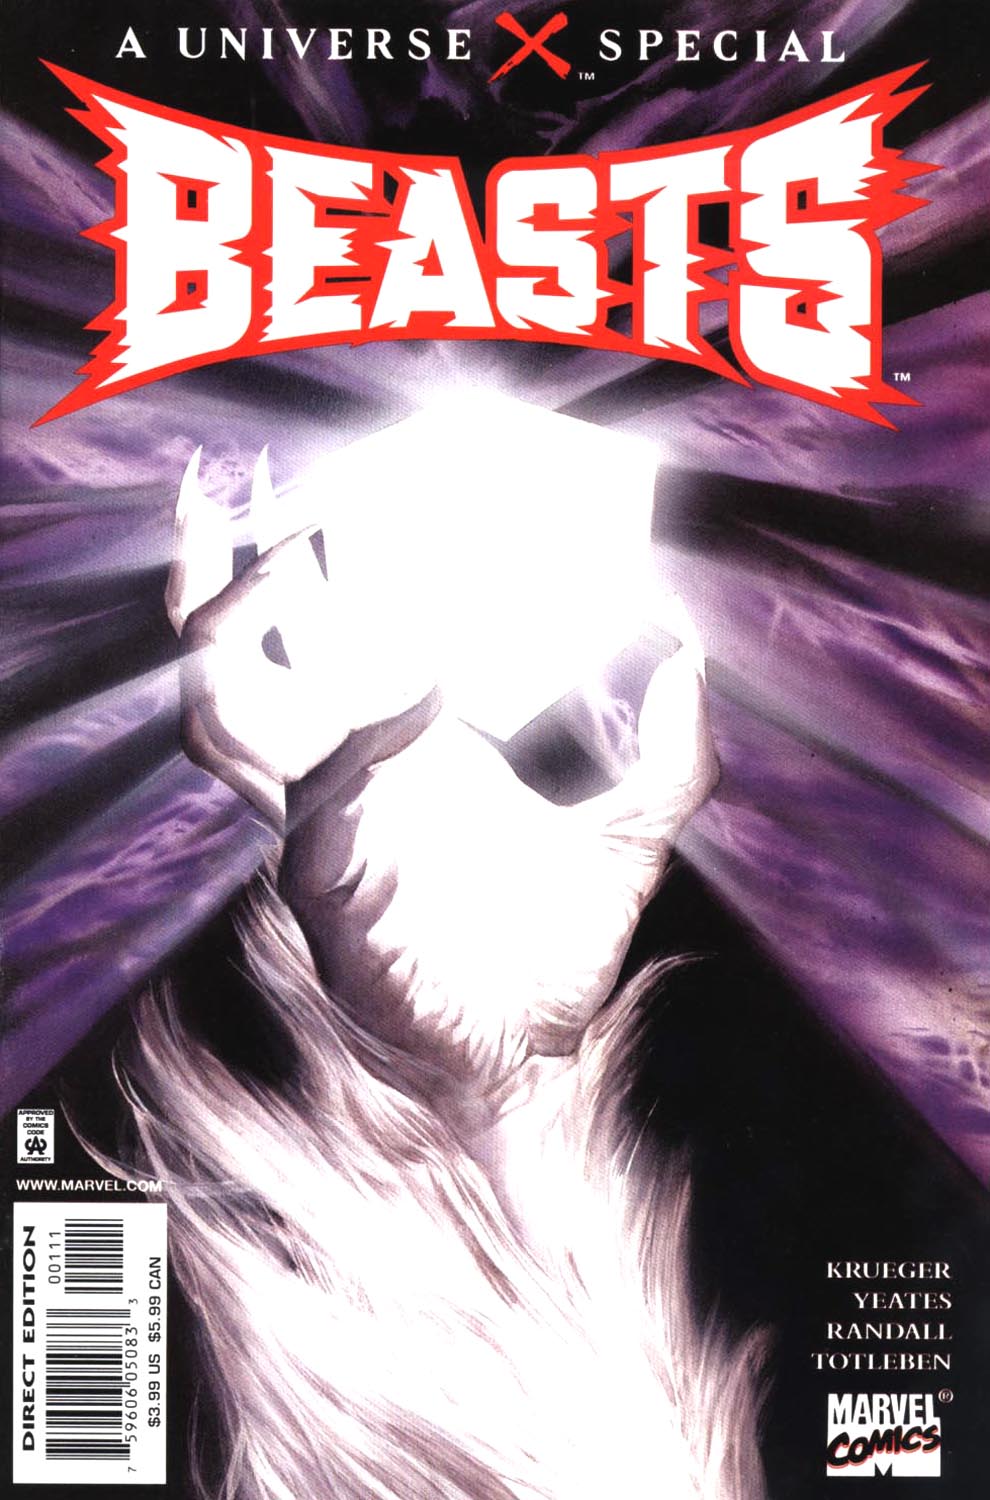 Read online Universe X Special comic -  Issue # Issue Beasts - 1